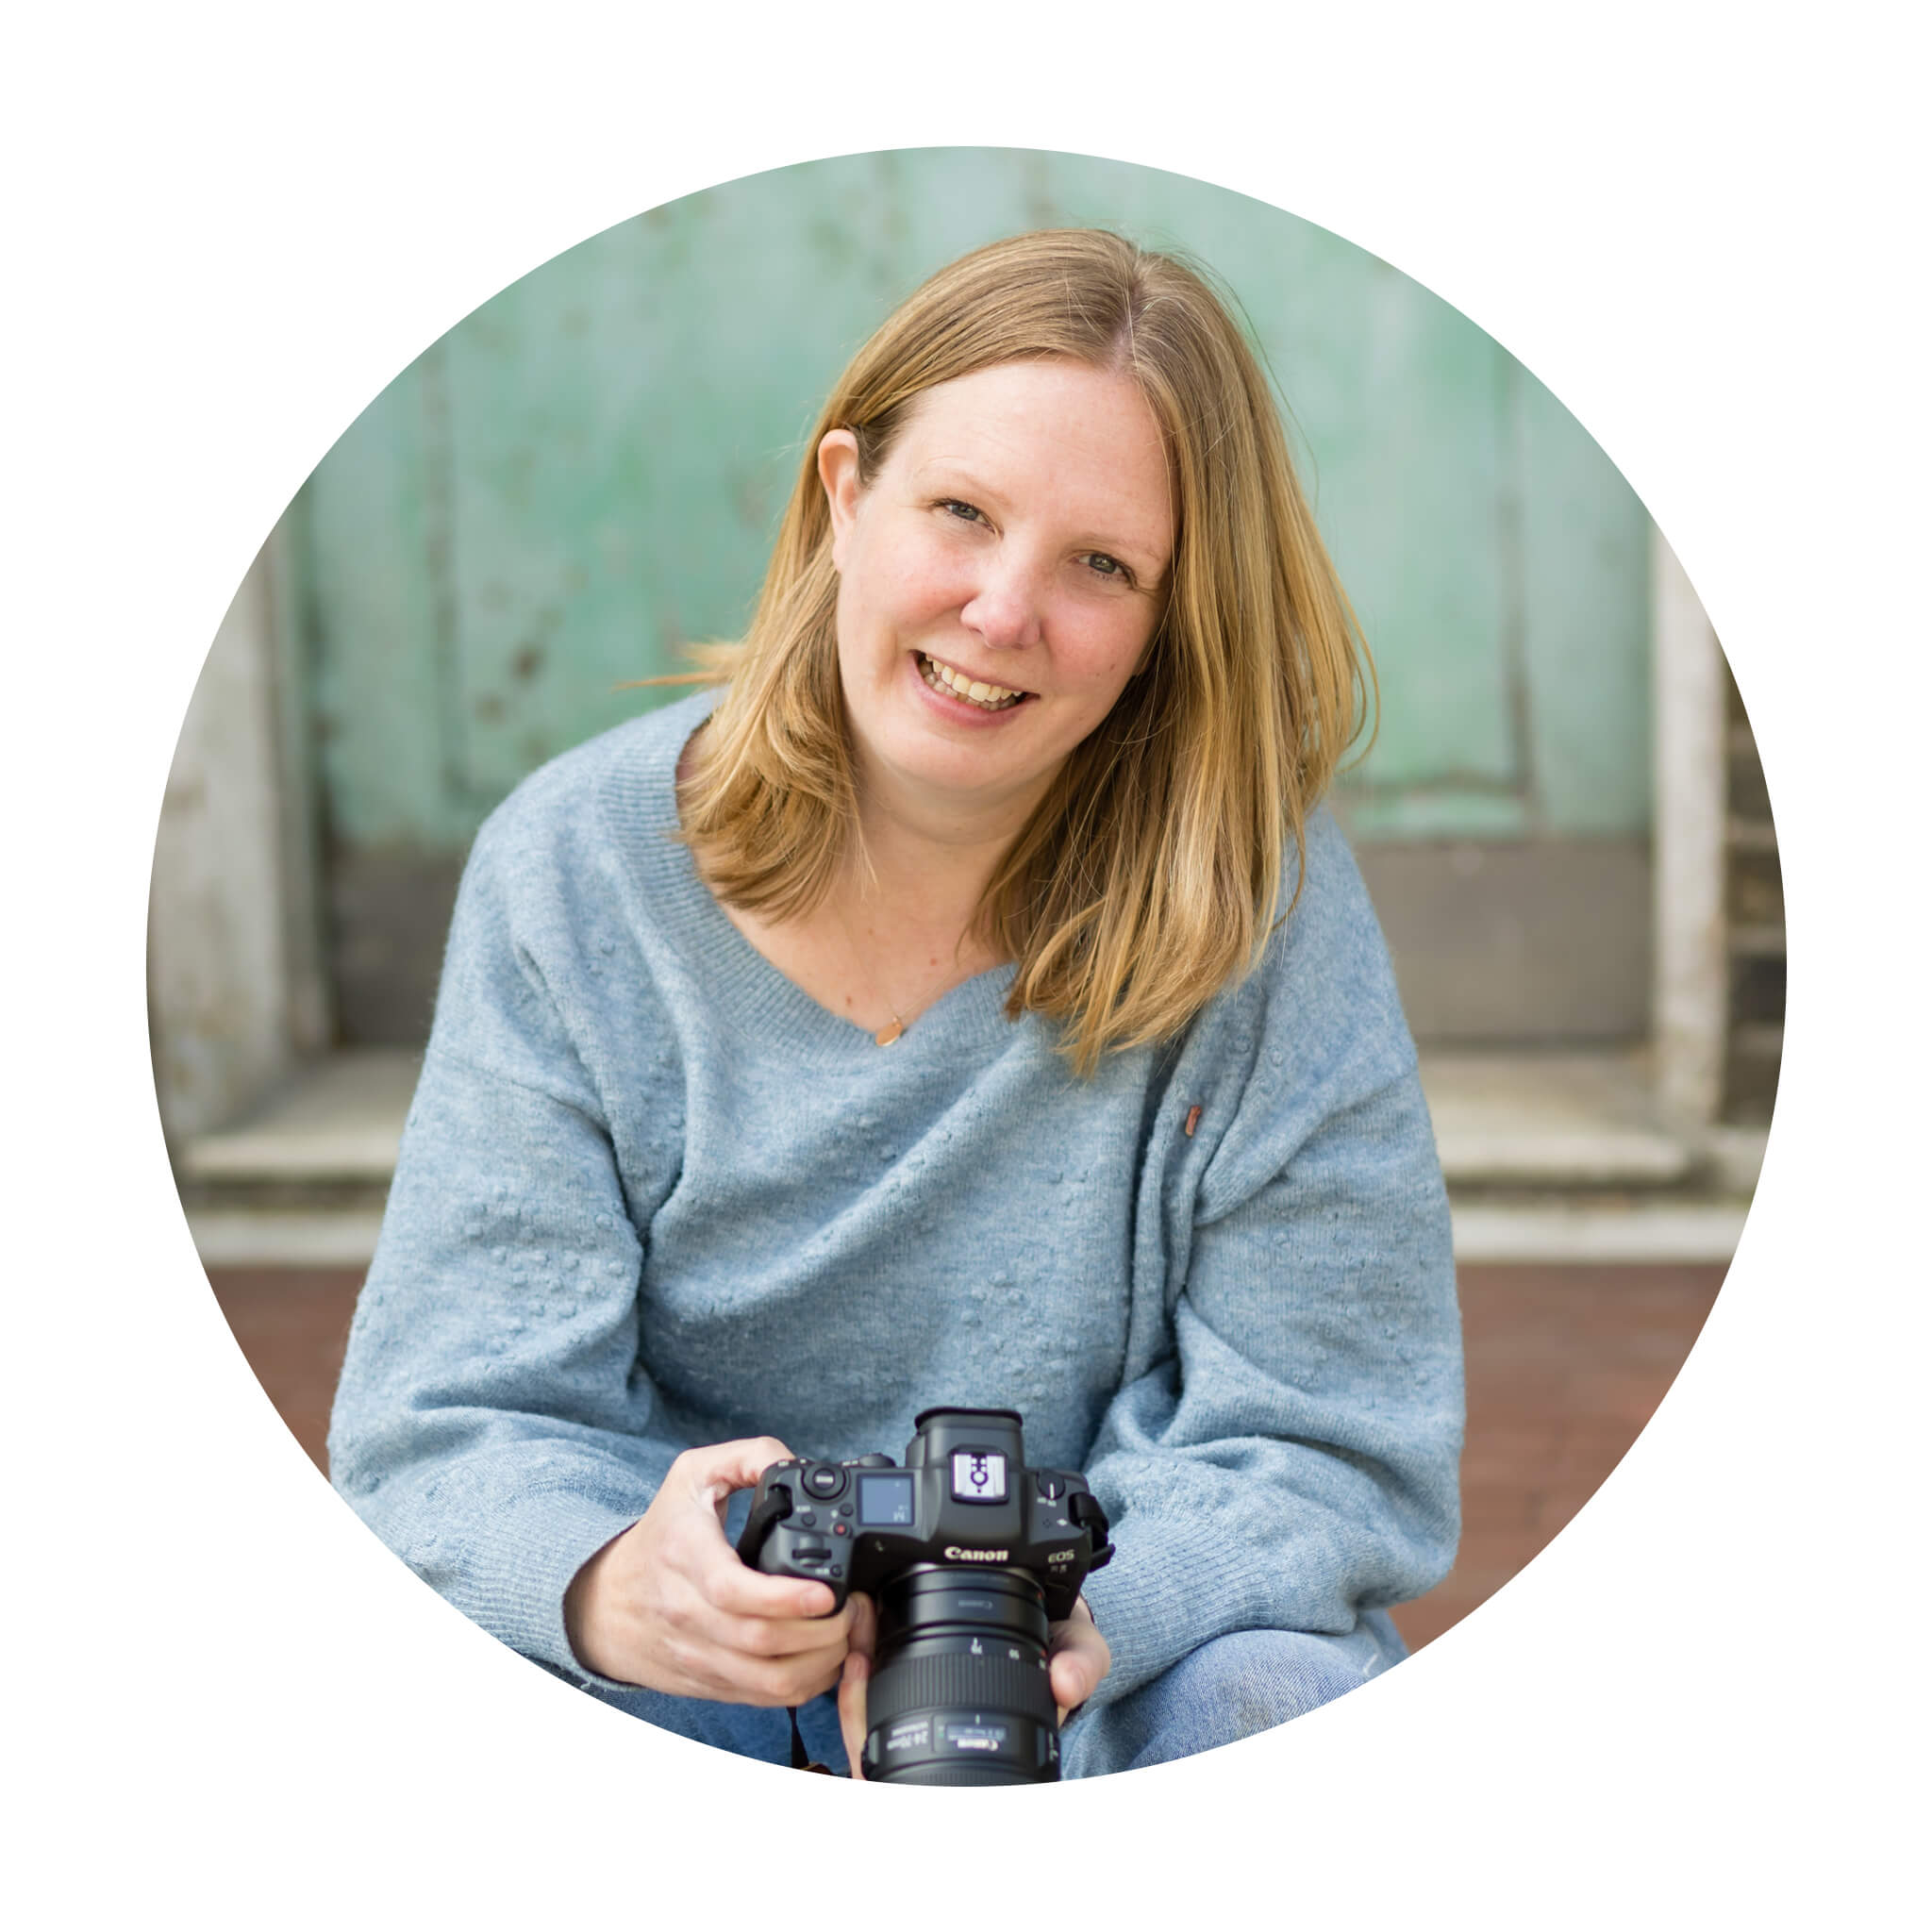 Lyndsey Abercromby, a Berkhamsted Photographer, sits holding her camera and smiling at the camera